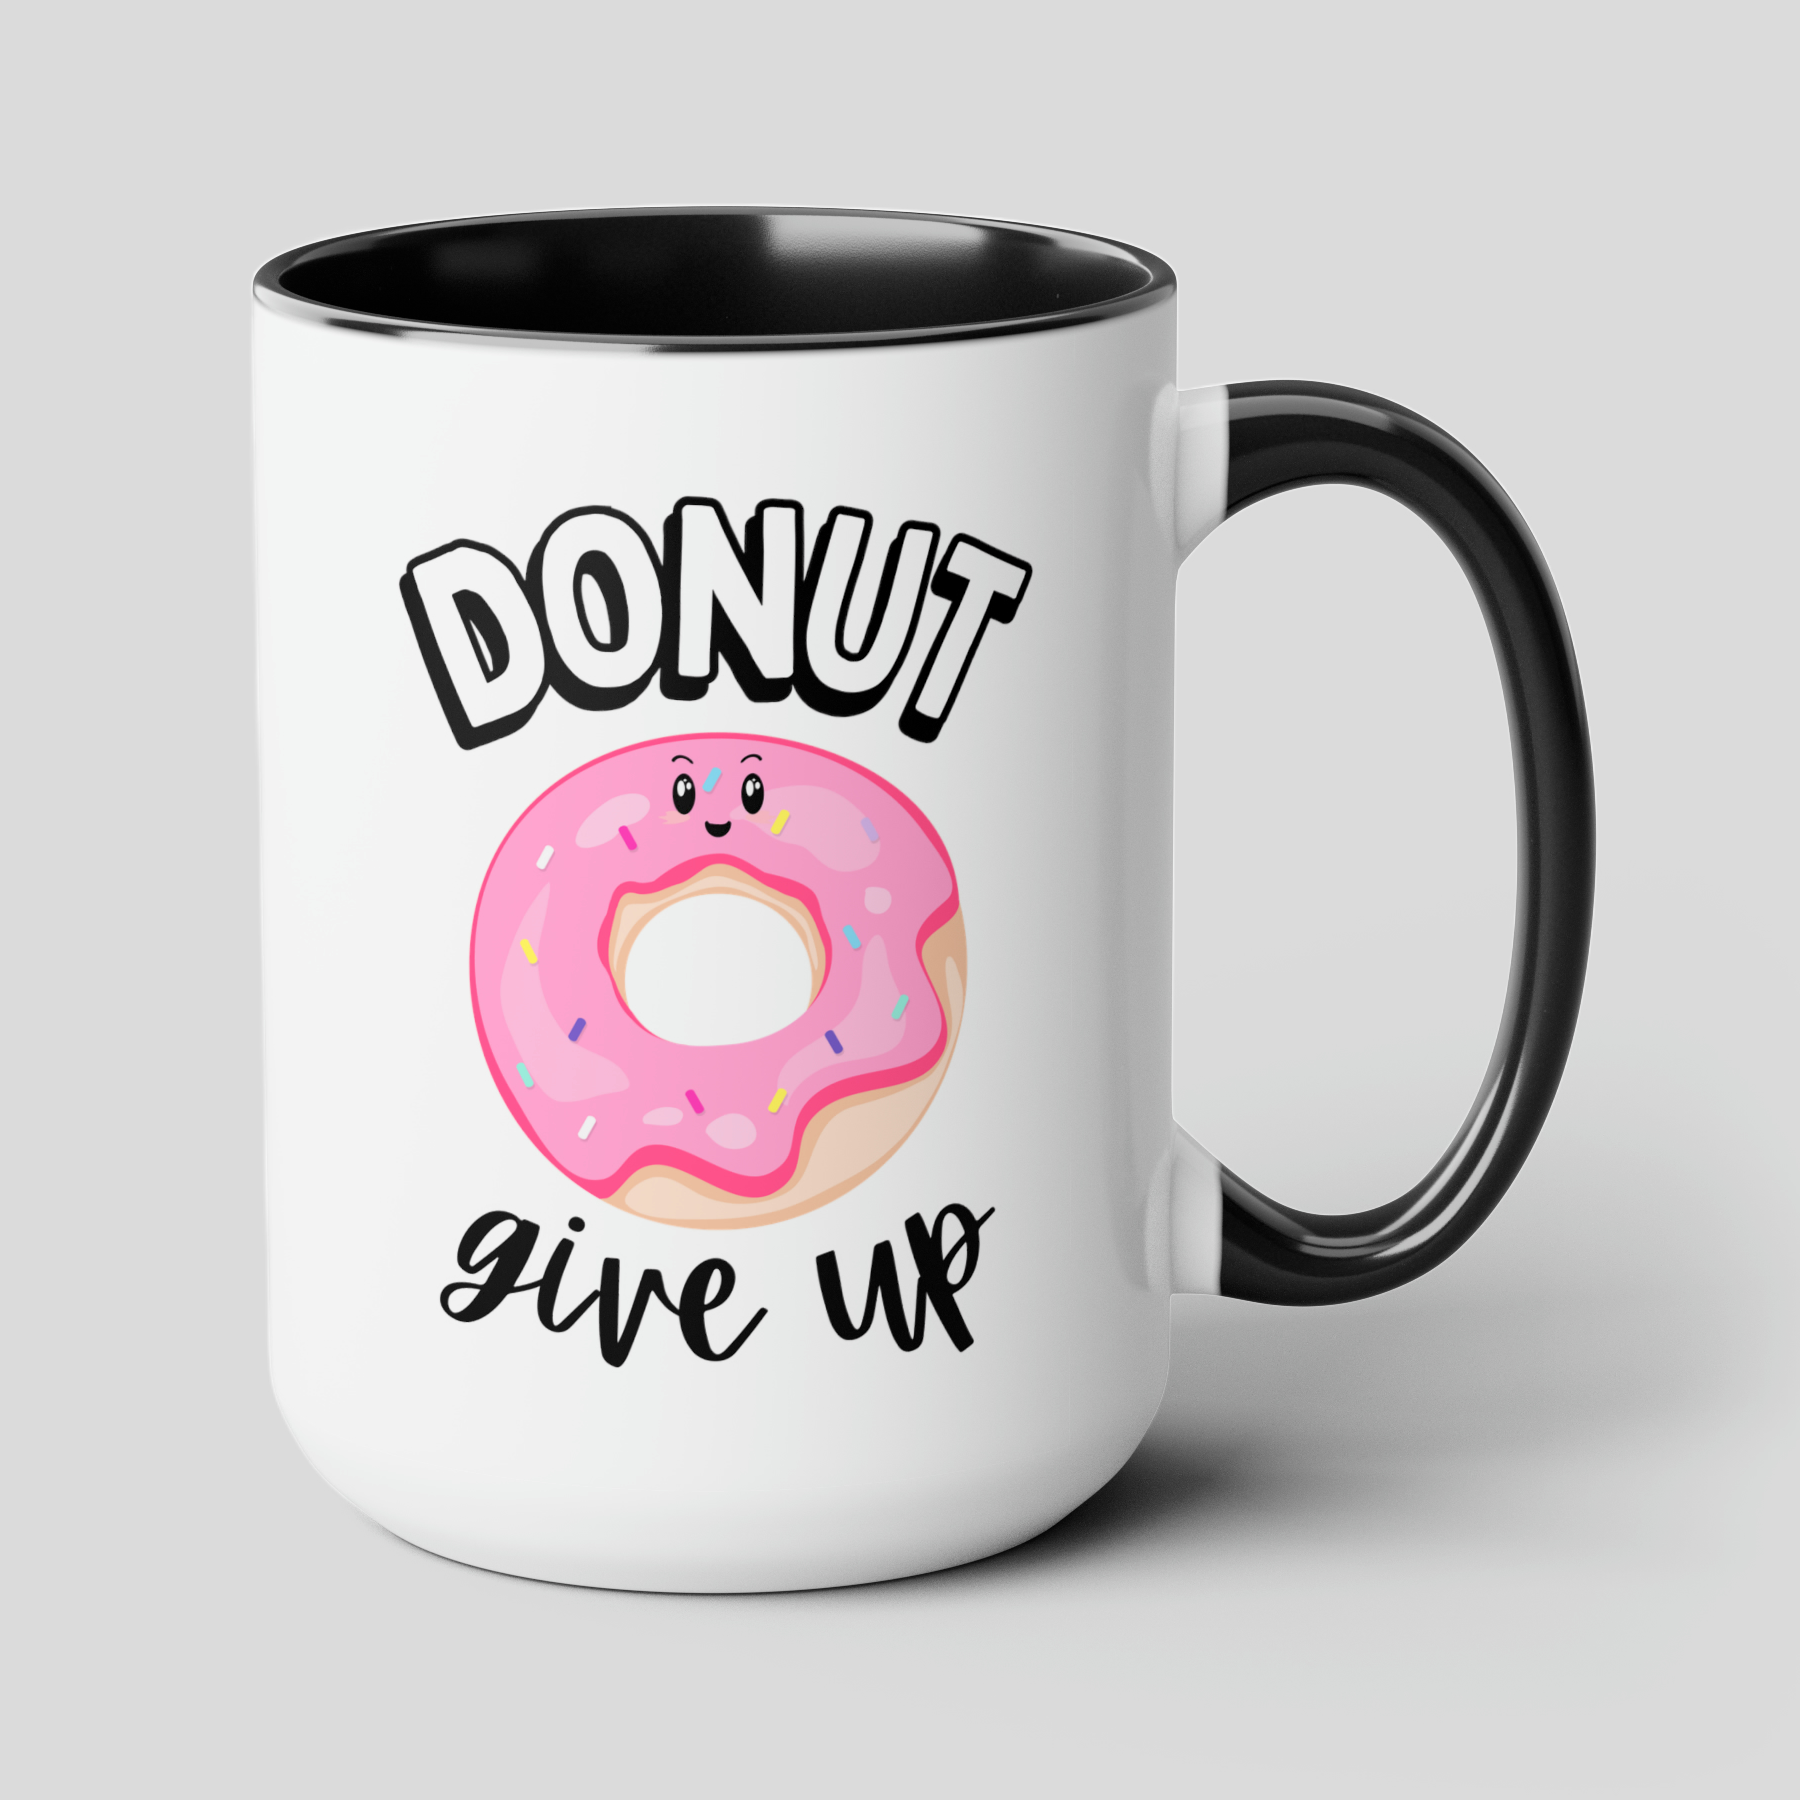 Donut Give Up 15oz white with black accent funny large coffee mug gift for foodie her cute food pun motivational inspirational mother's day waveywares wavey wares wavywares wavy wares cover